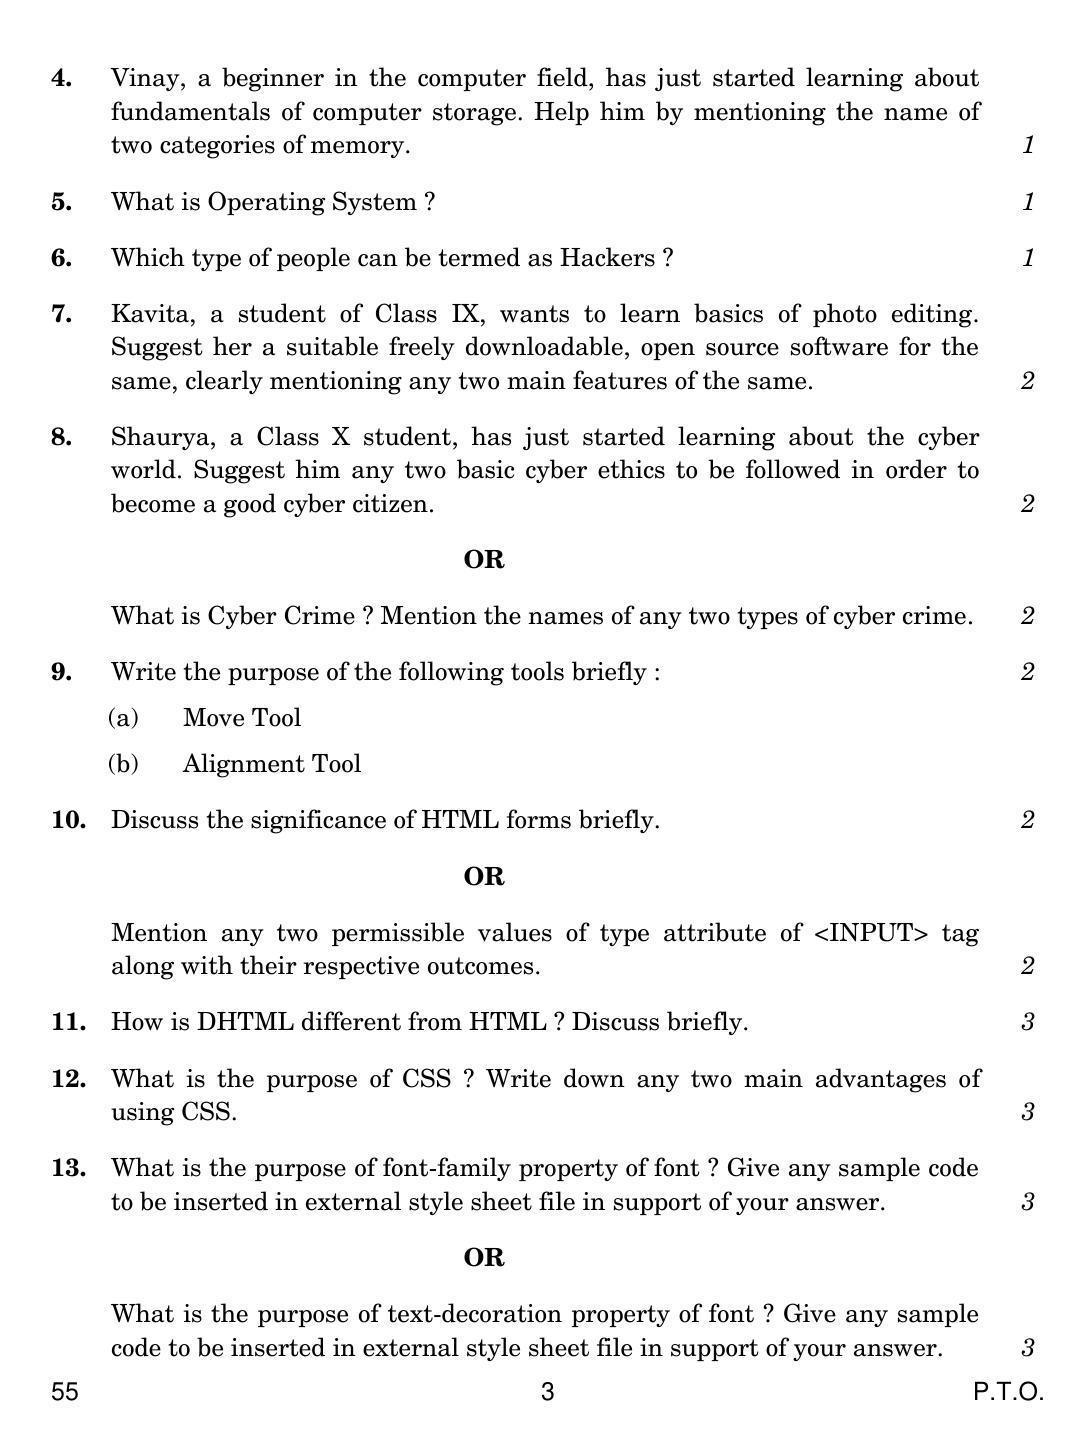 CBSE Class 10 55 INFORMATION AND COMMUNICATION TECHNOLOGY (ICT) 2019 Question Paper - Page 3